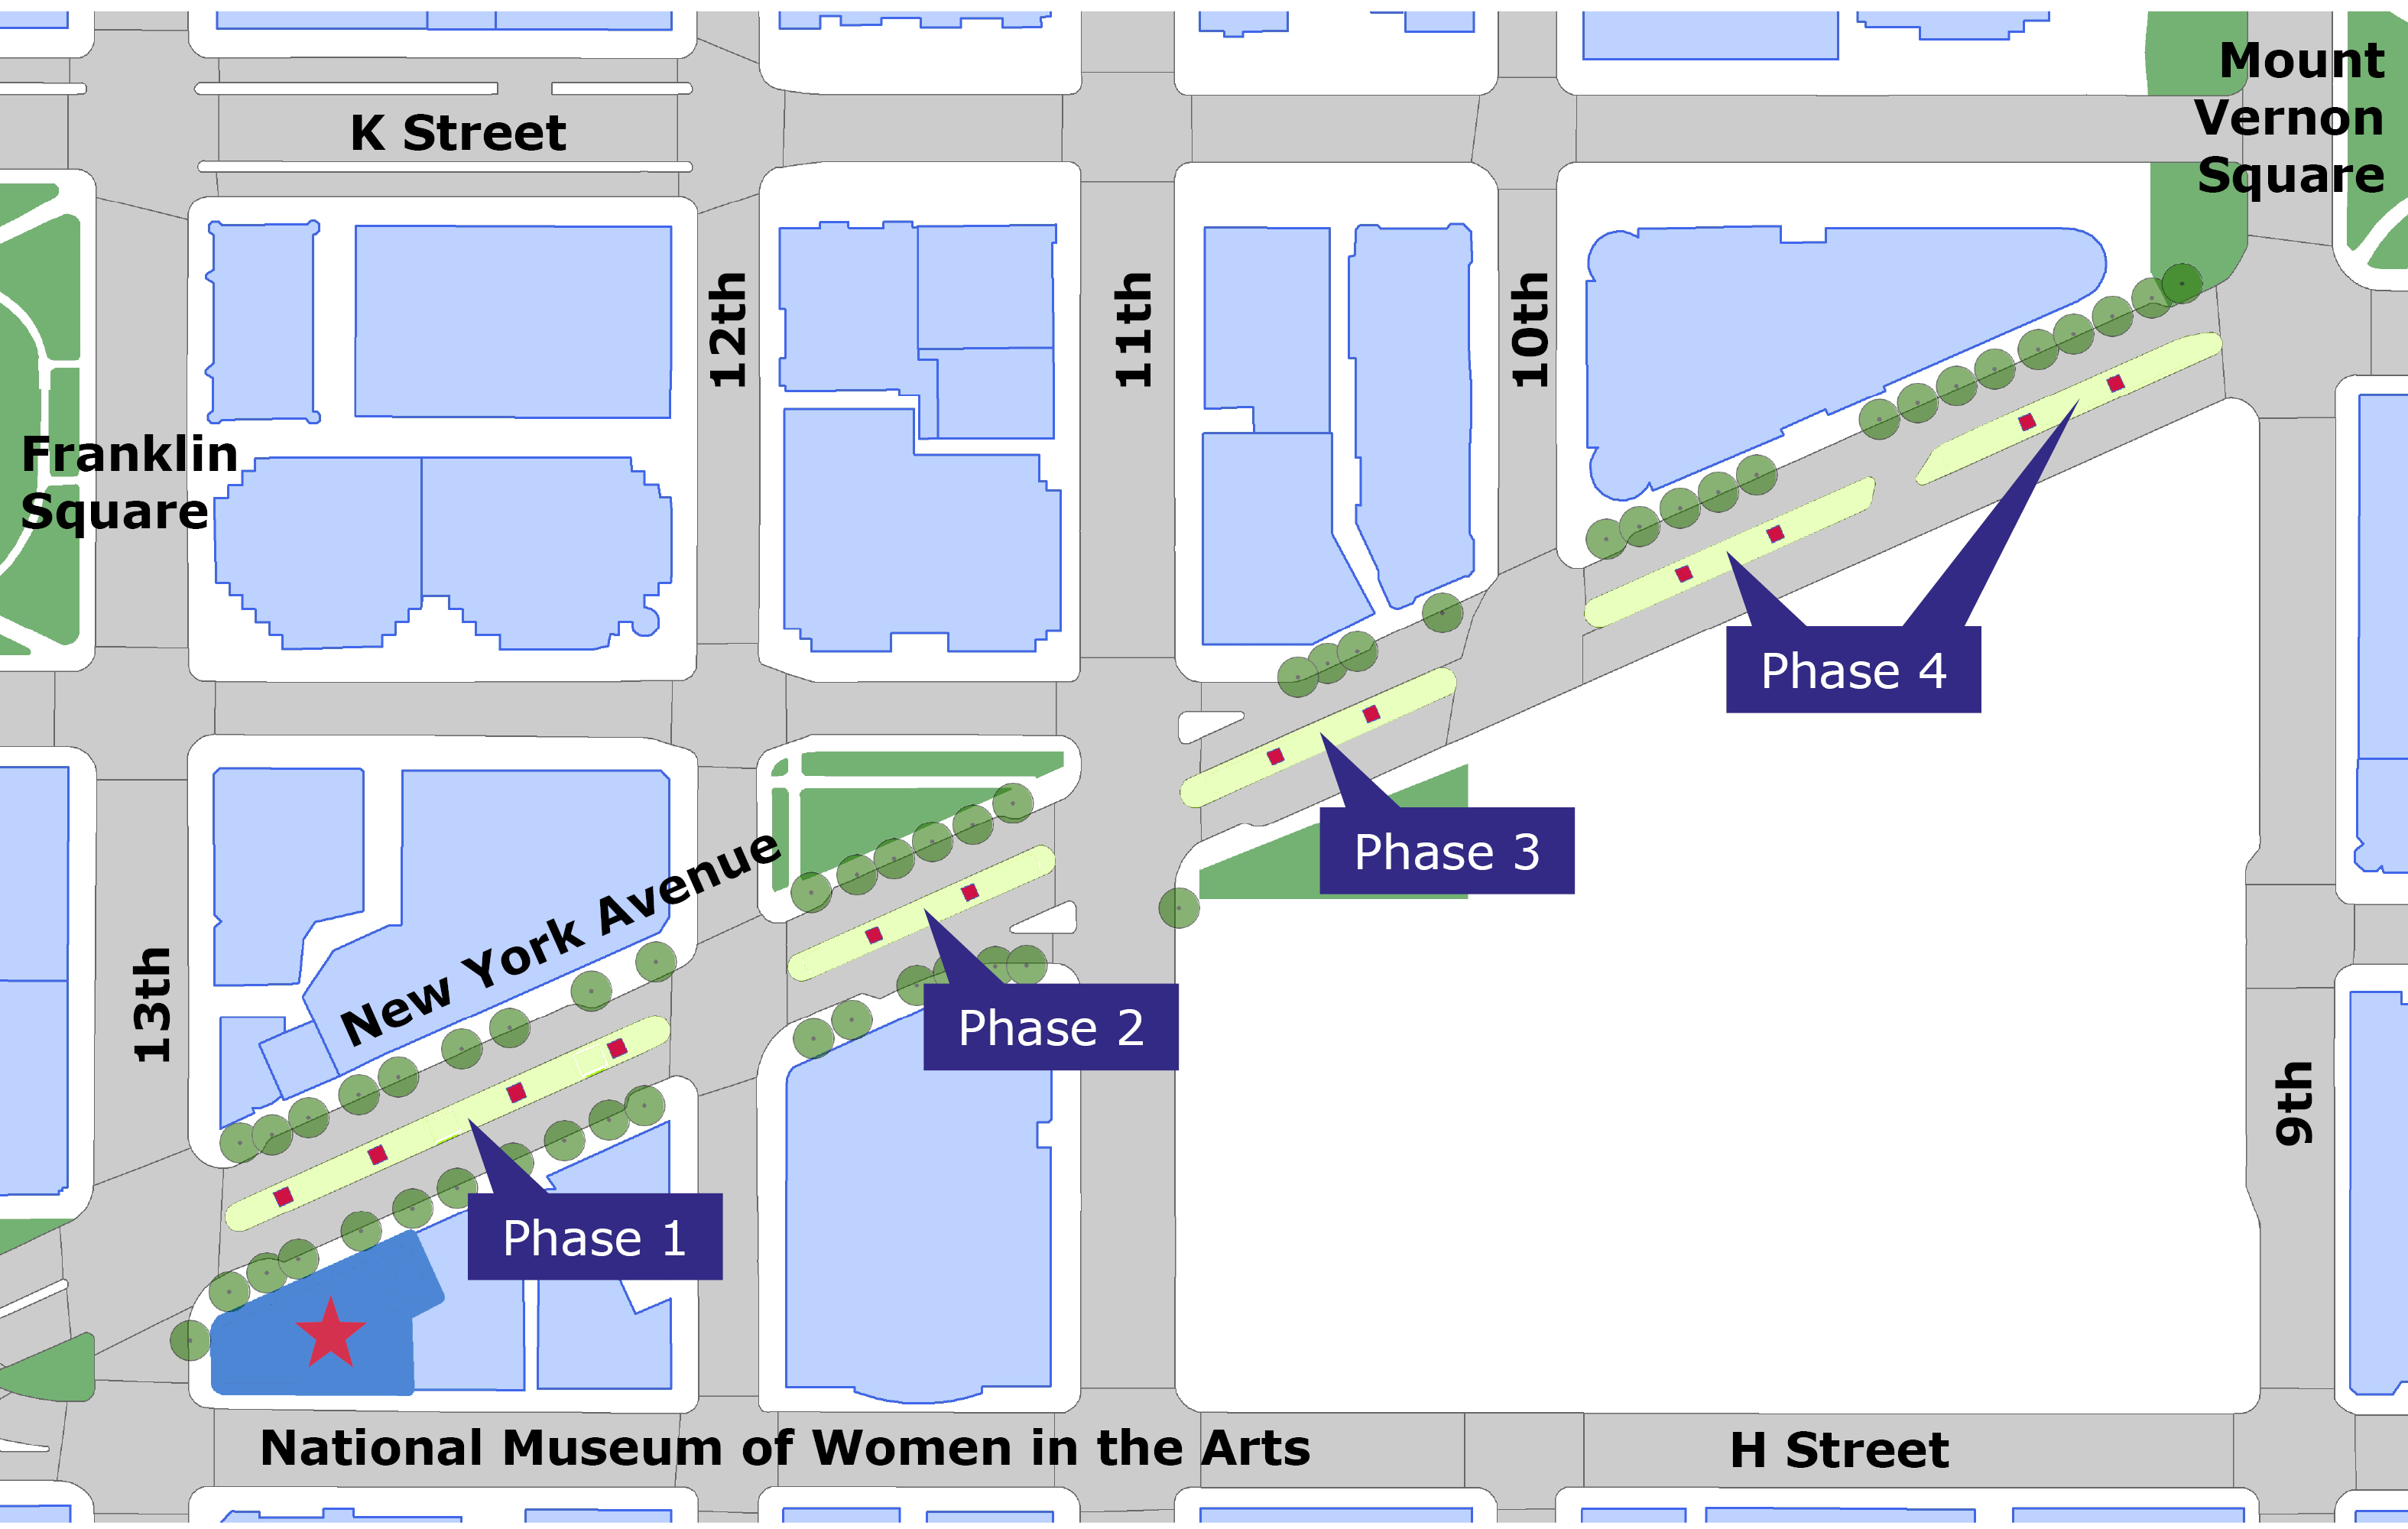 A map of New York Avenue pointing out where the sculptures will be located.